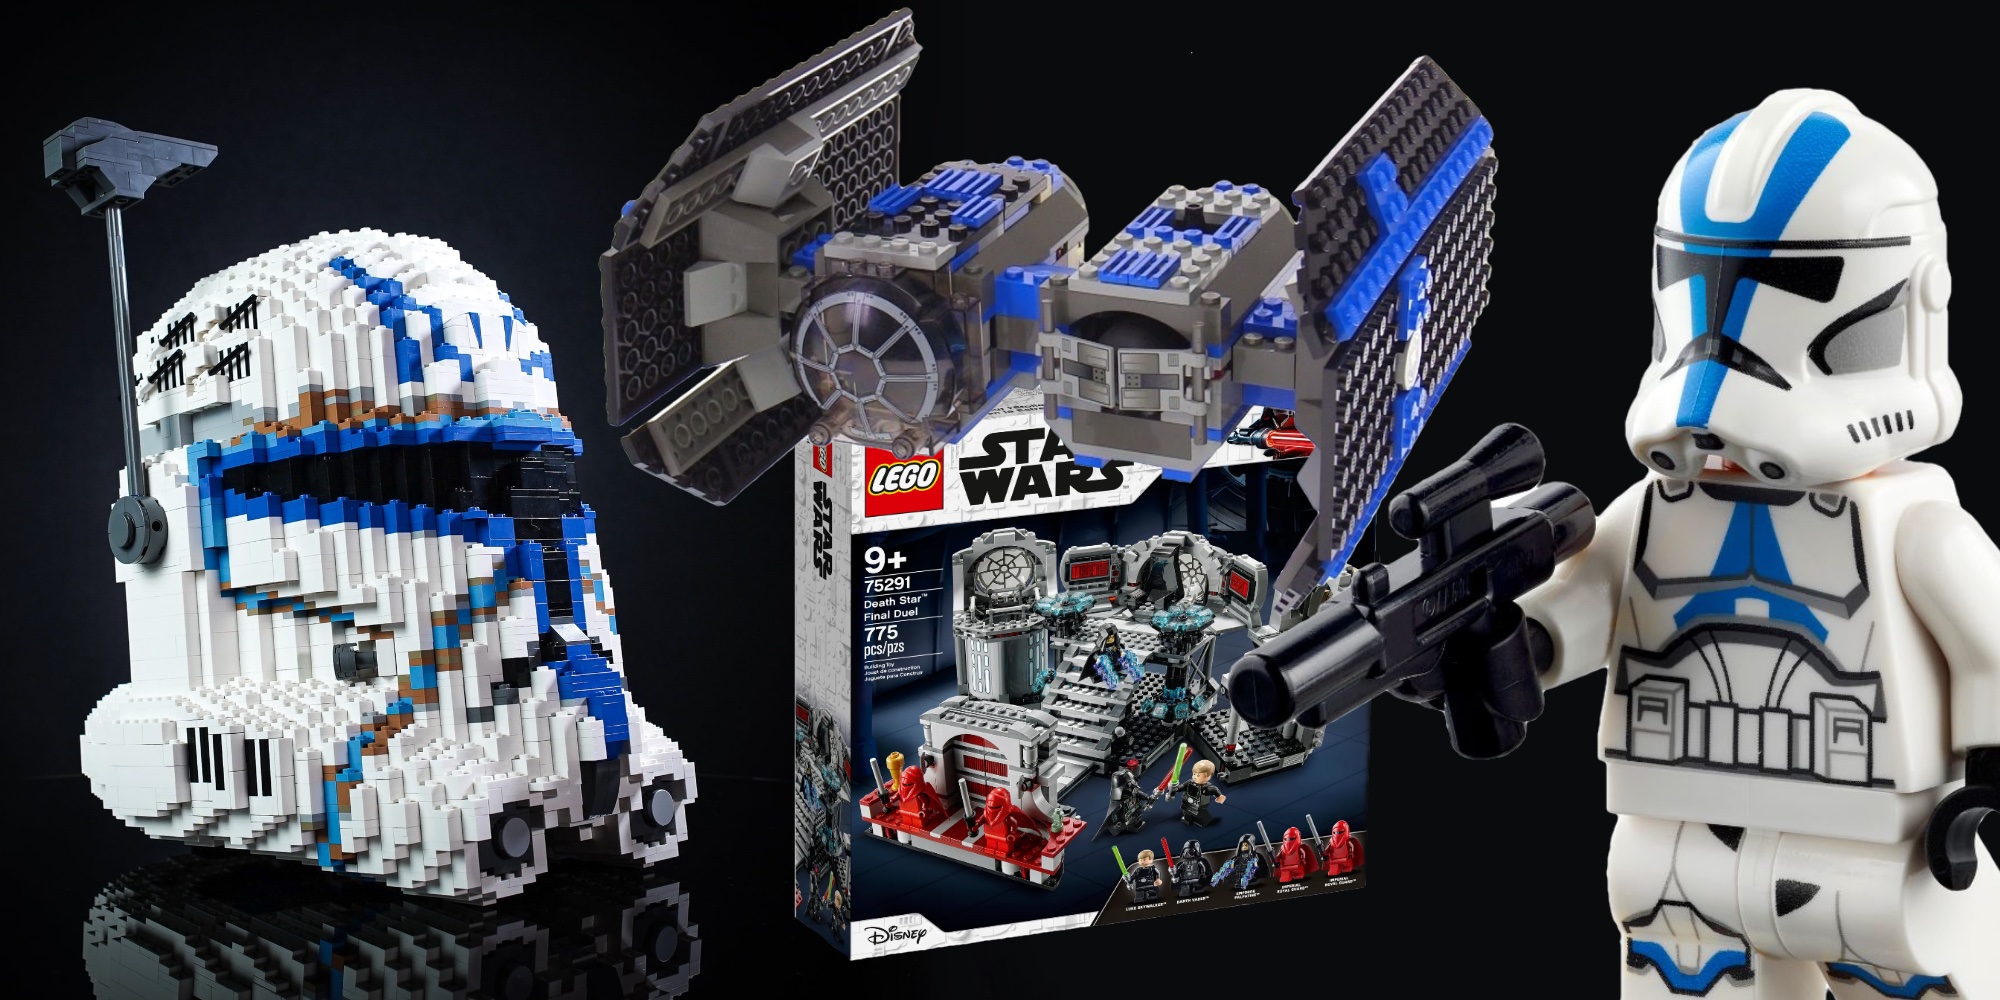 The NEW 2023 LEGO Star Wars Captain Rex Minifigure Is Actually BAD? 